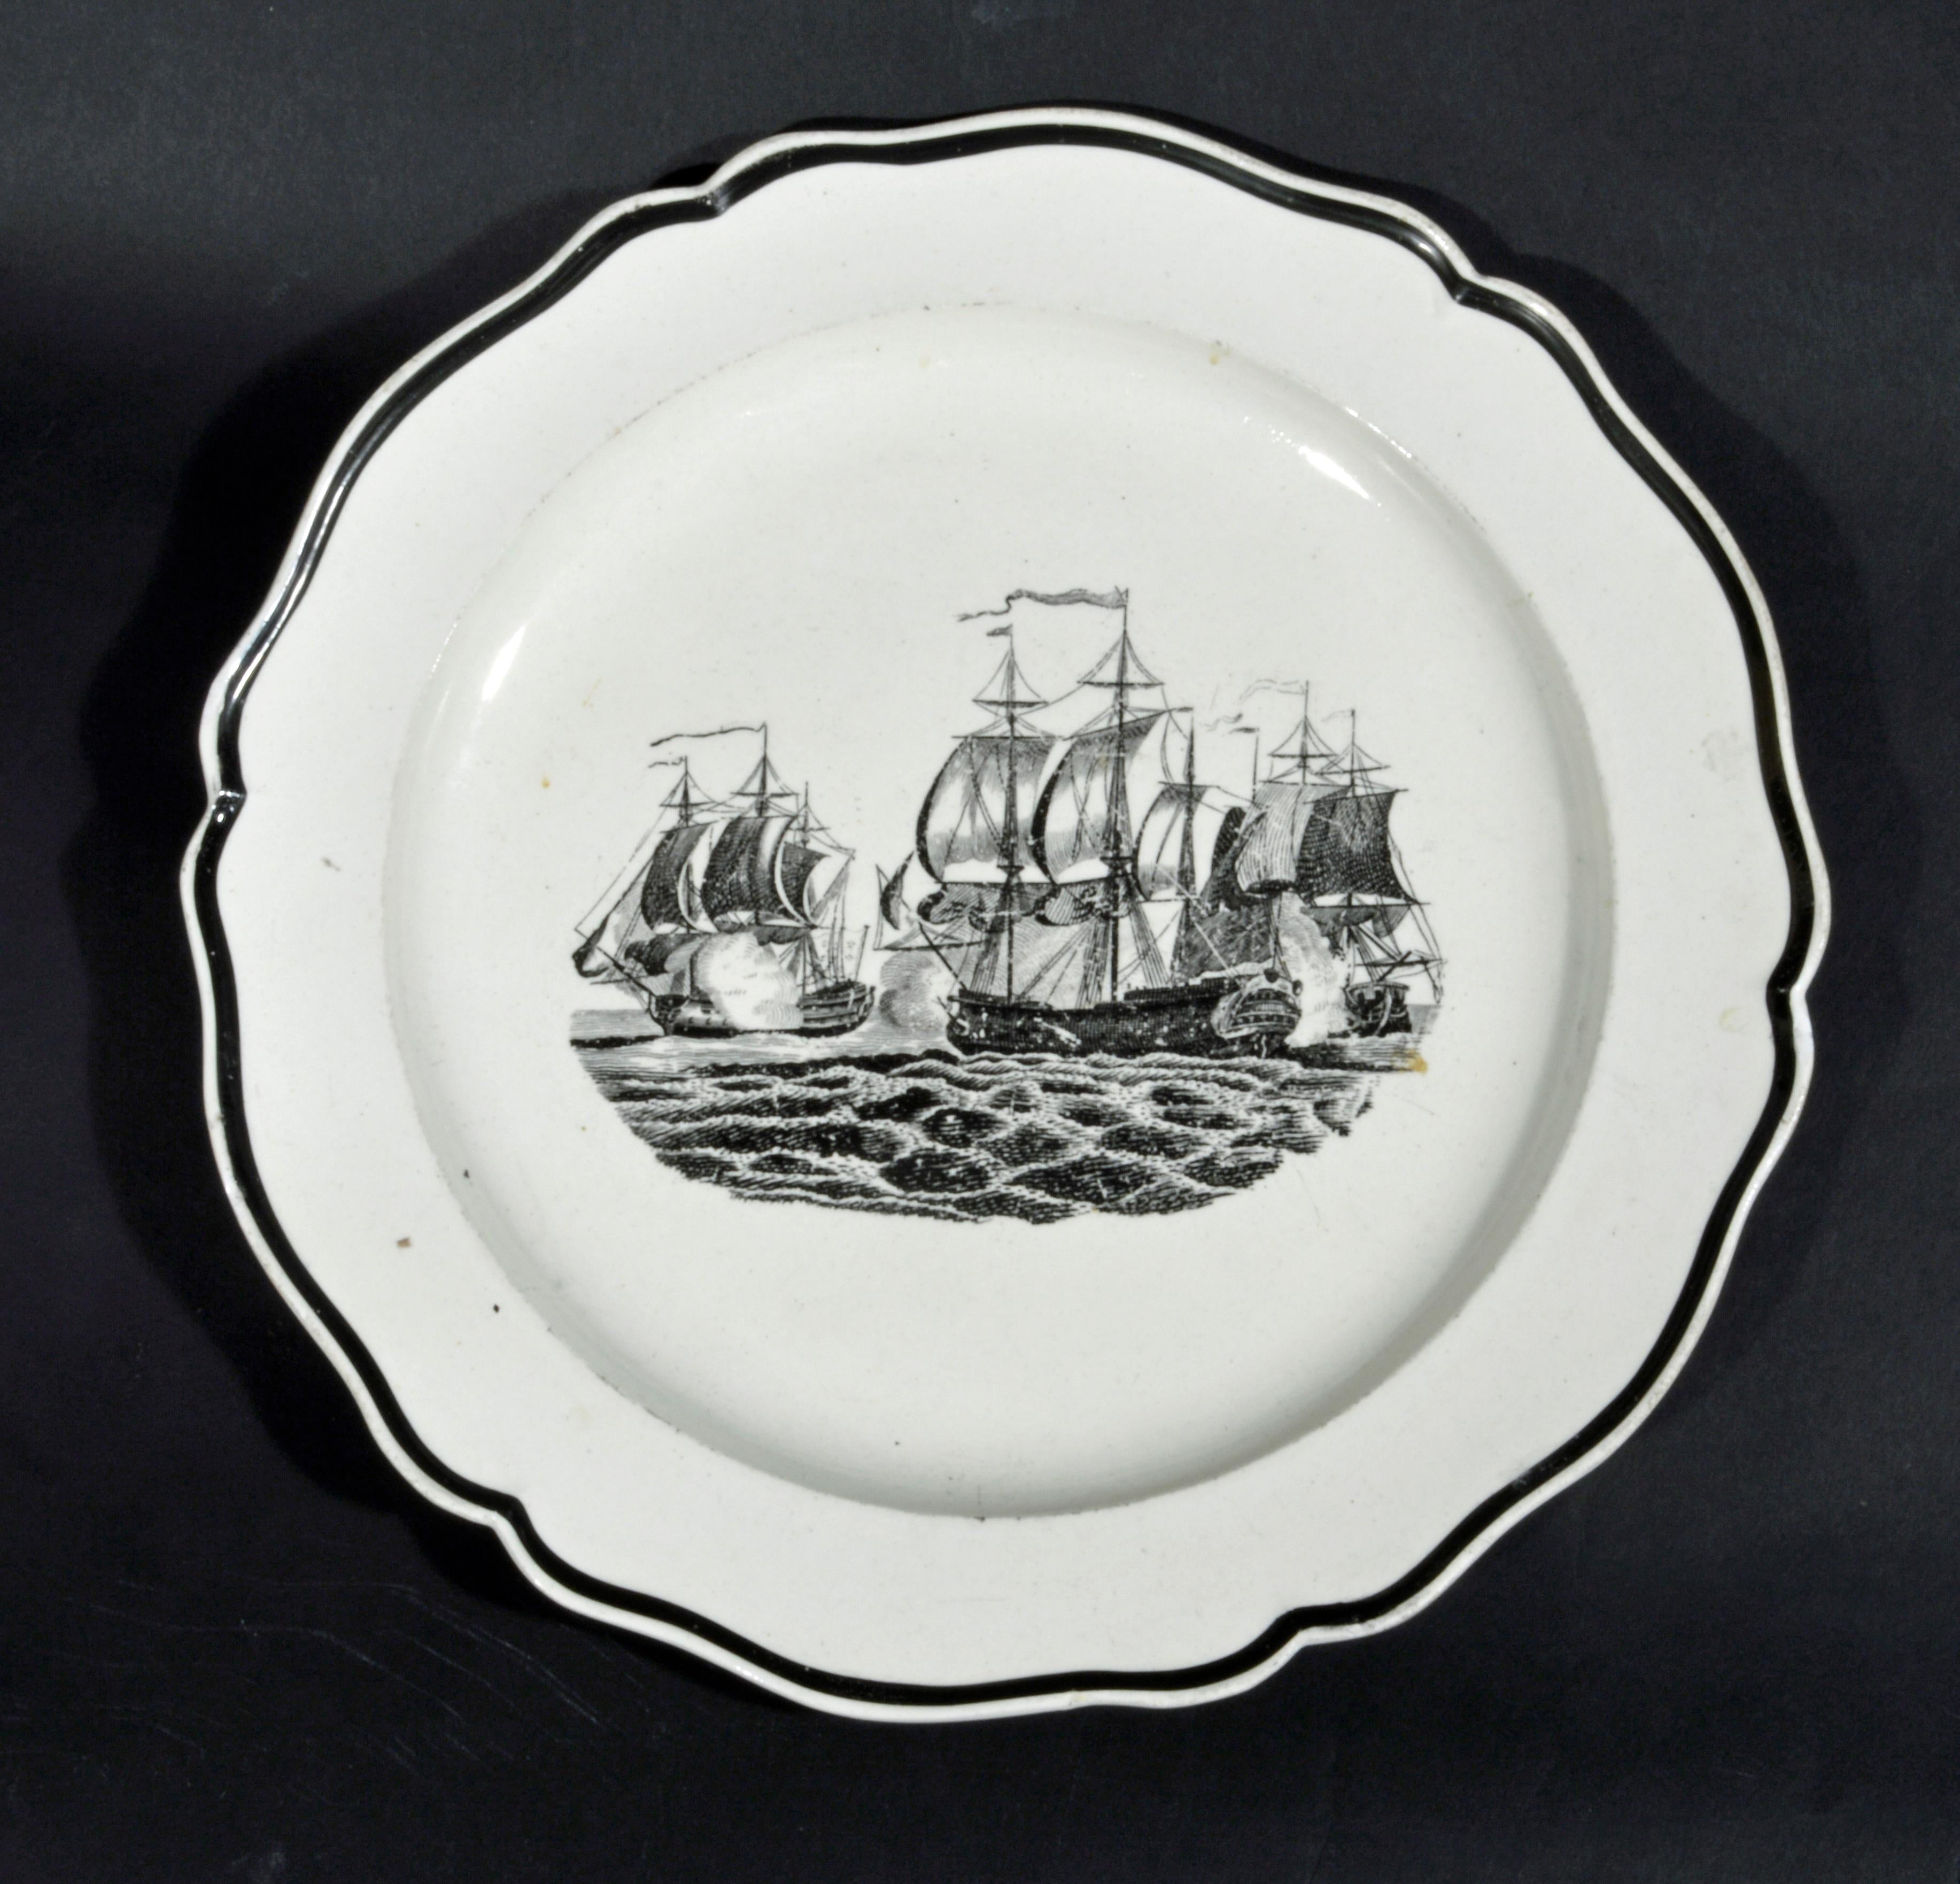 Liverpool Pearlware Plates decorated with Ships,
Pair,
Circa 1800.

The Liverpool pottery pearlware plates with black rim are each printed with the image of a naval engagement.

Diameter: 9 3/4 inches

The Liverpool pottery pearlware plates with